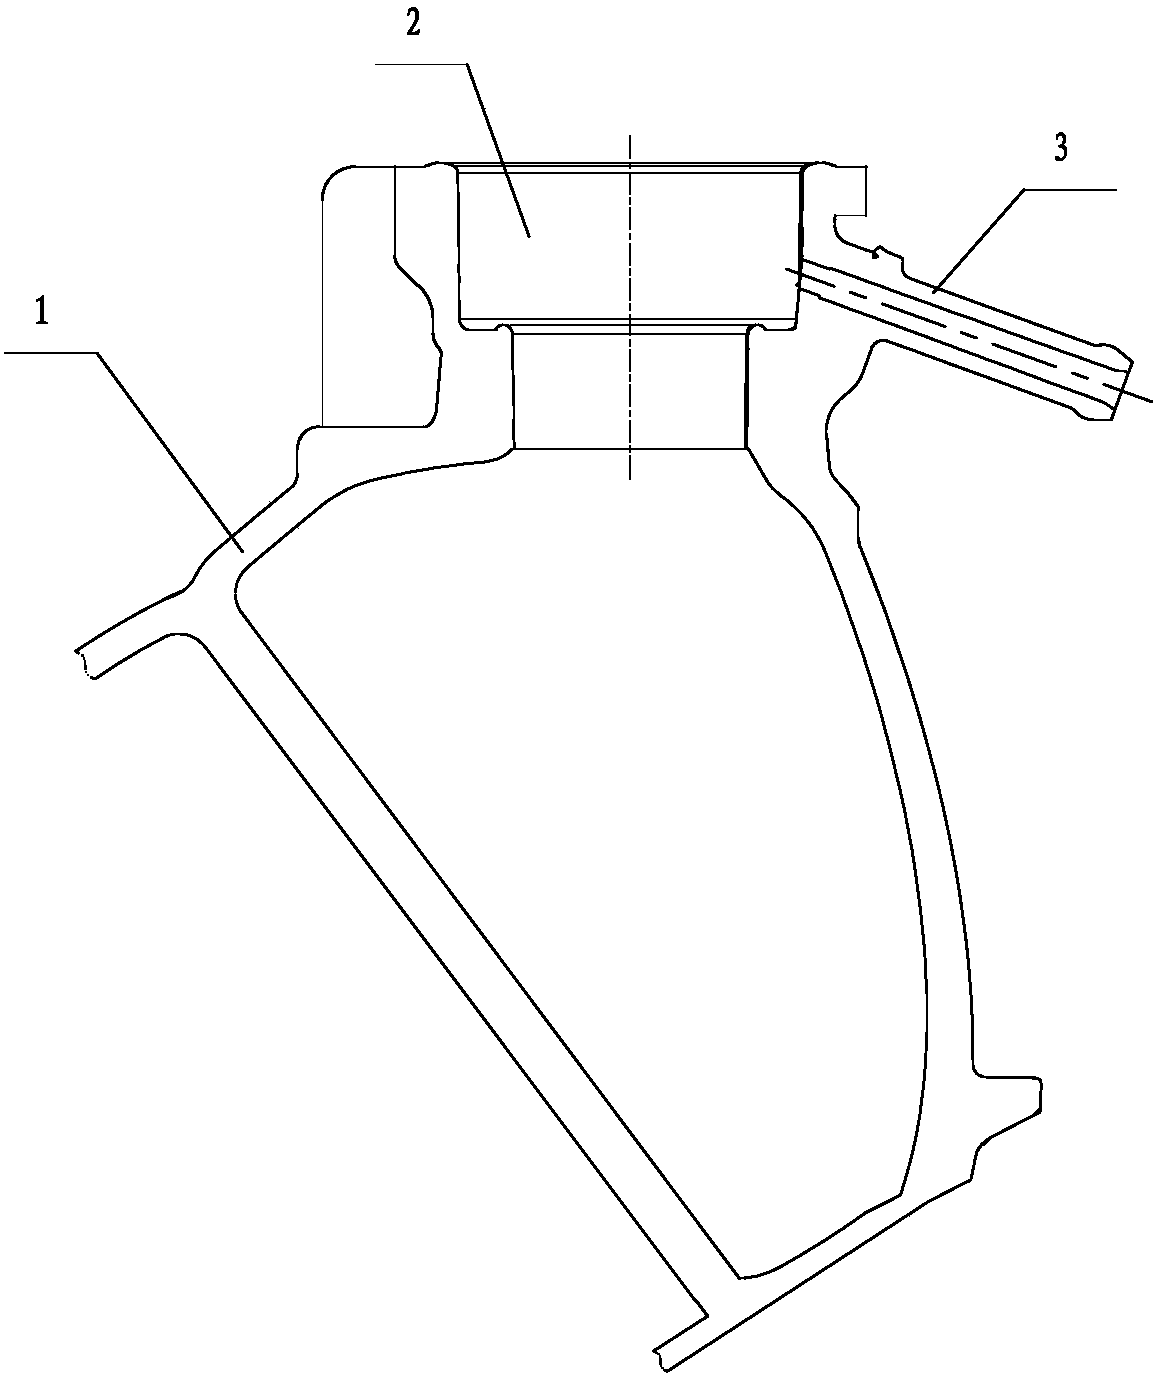 The demoulding device at the water injection port of the water tank cover of the automobile